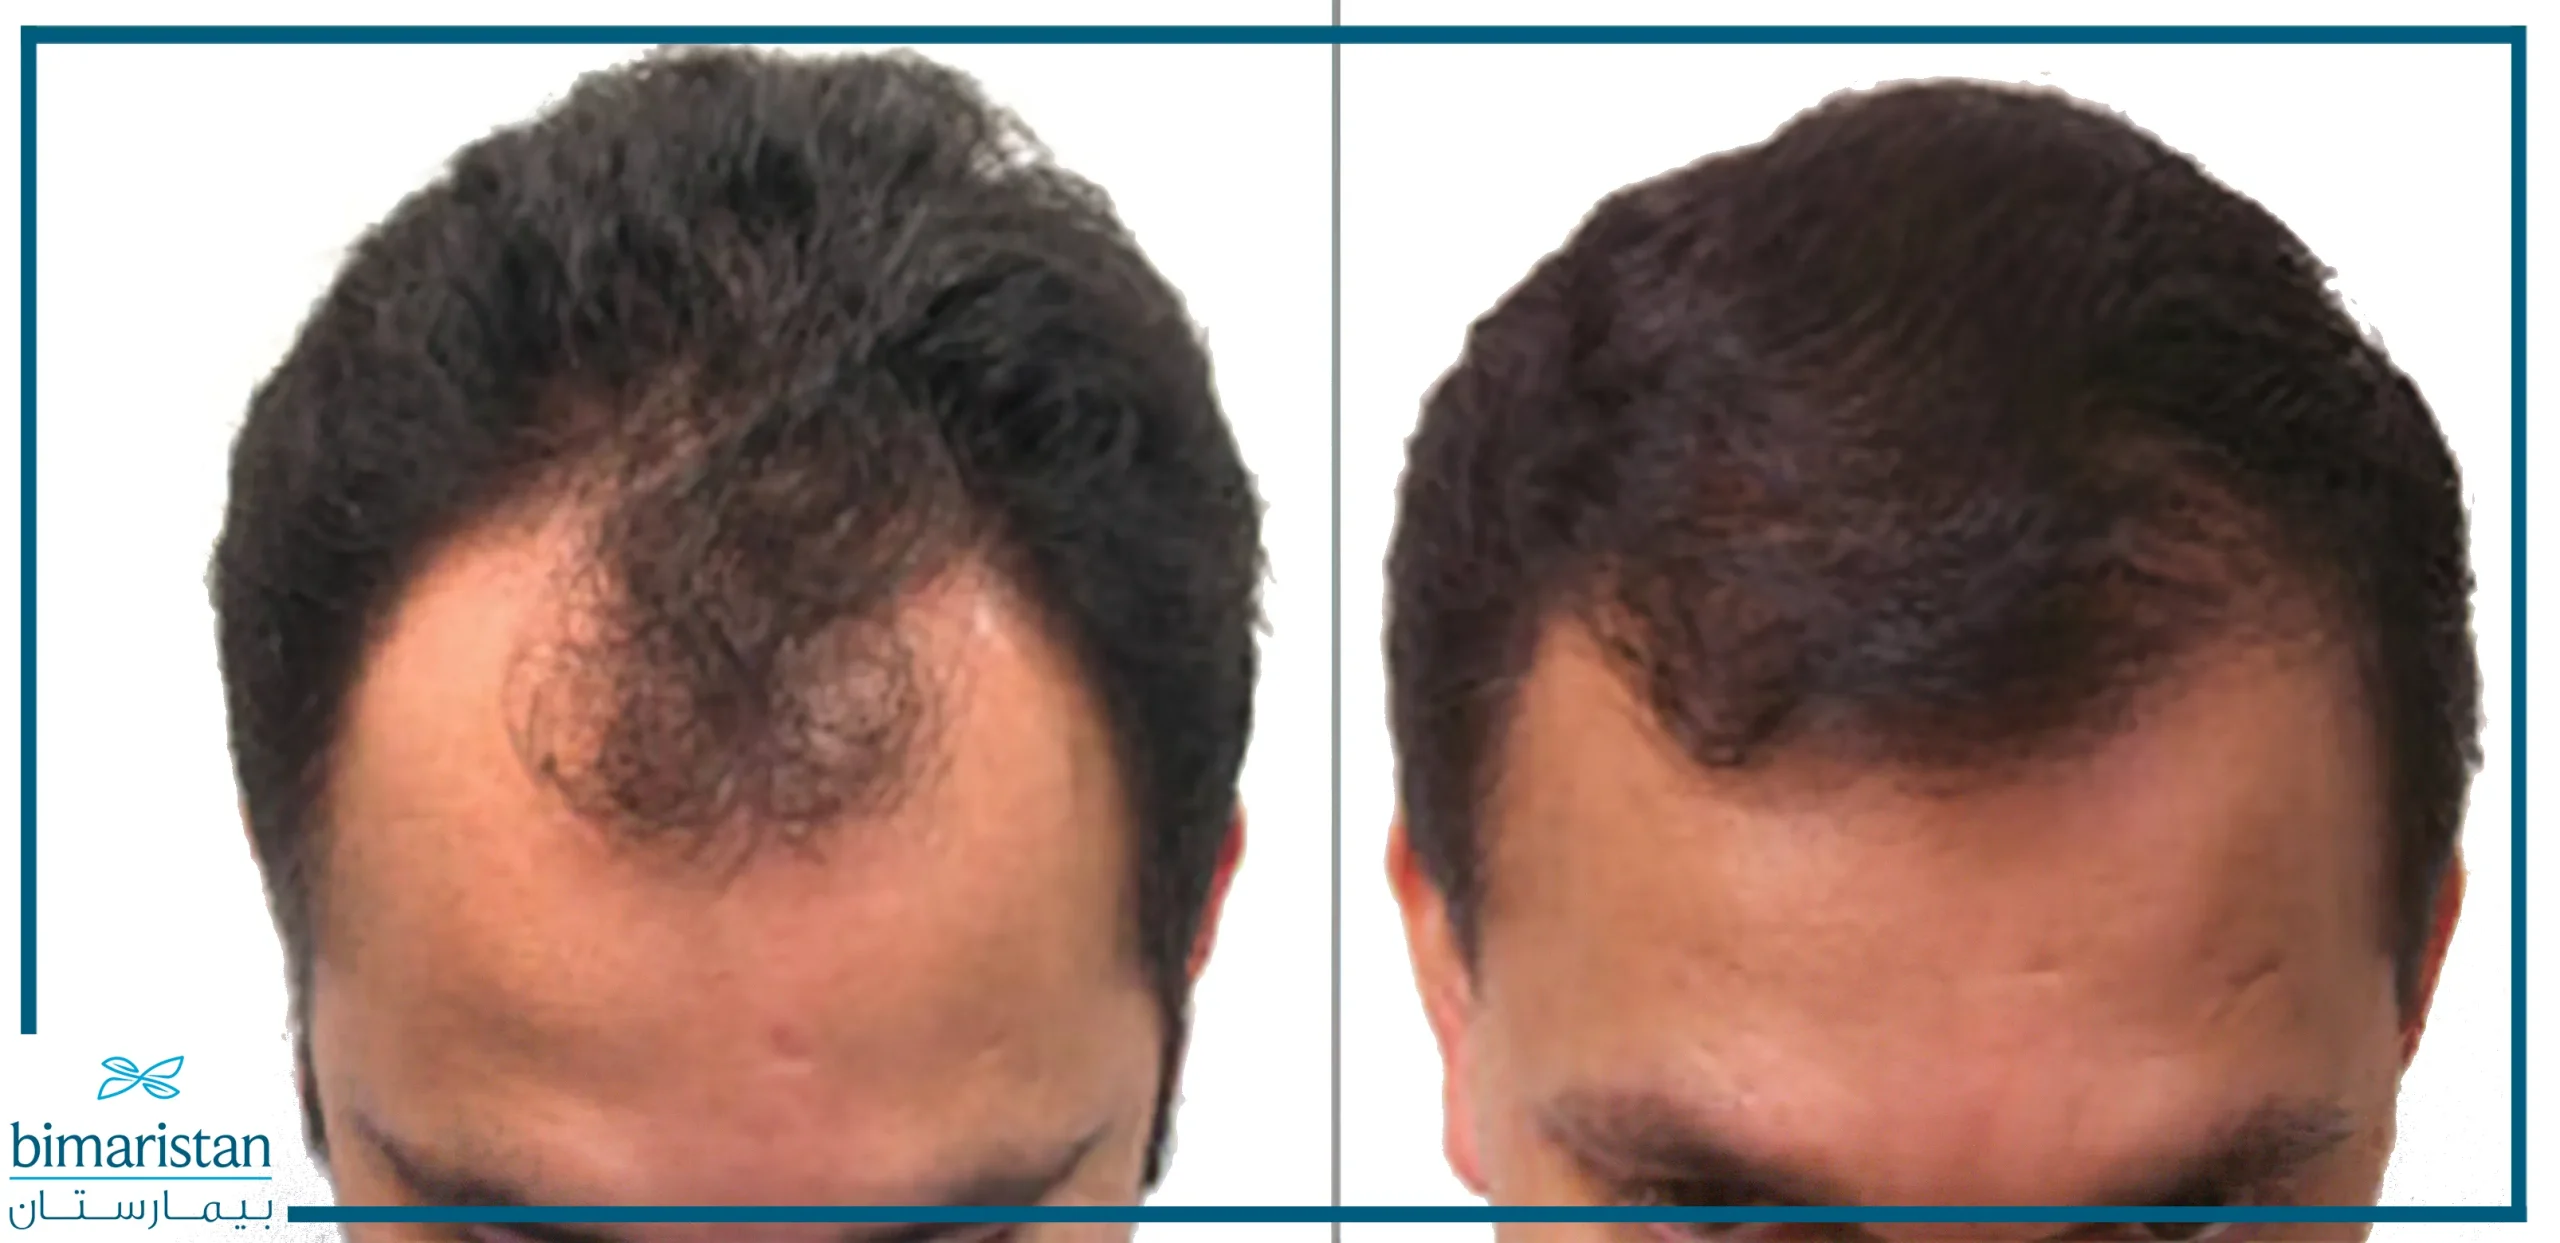 A Picture Of A Hair Transplantation Patient Before And After Undergoing A Robotic Hair Surgery.